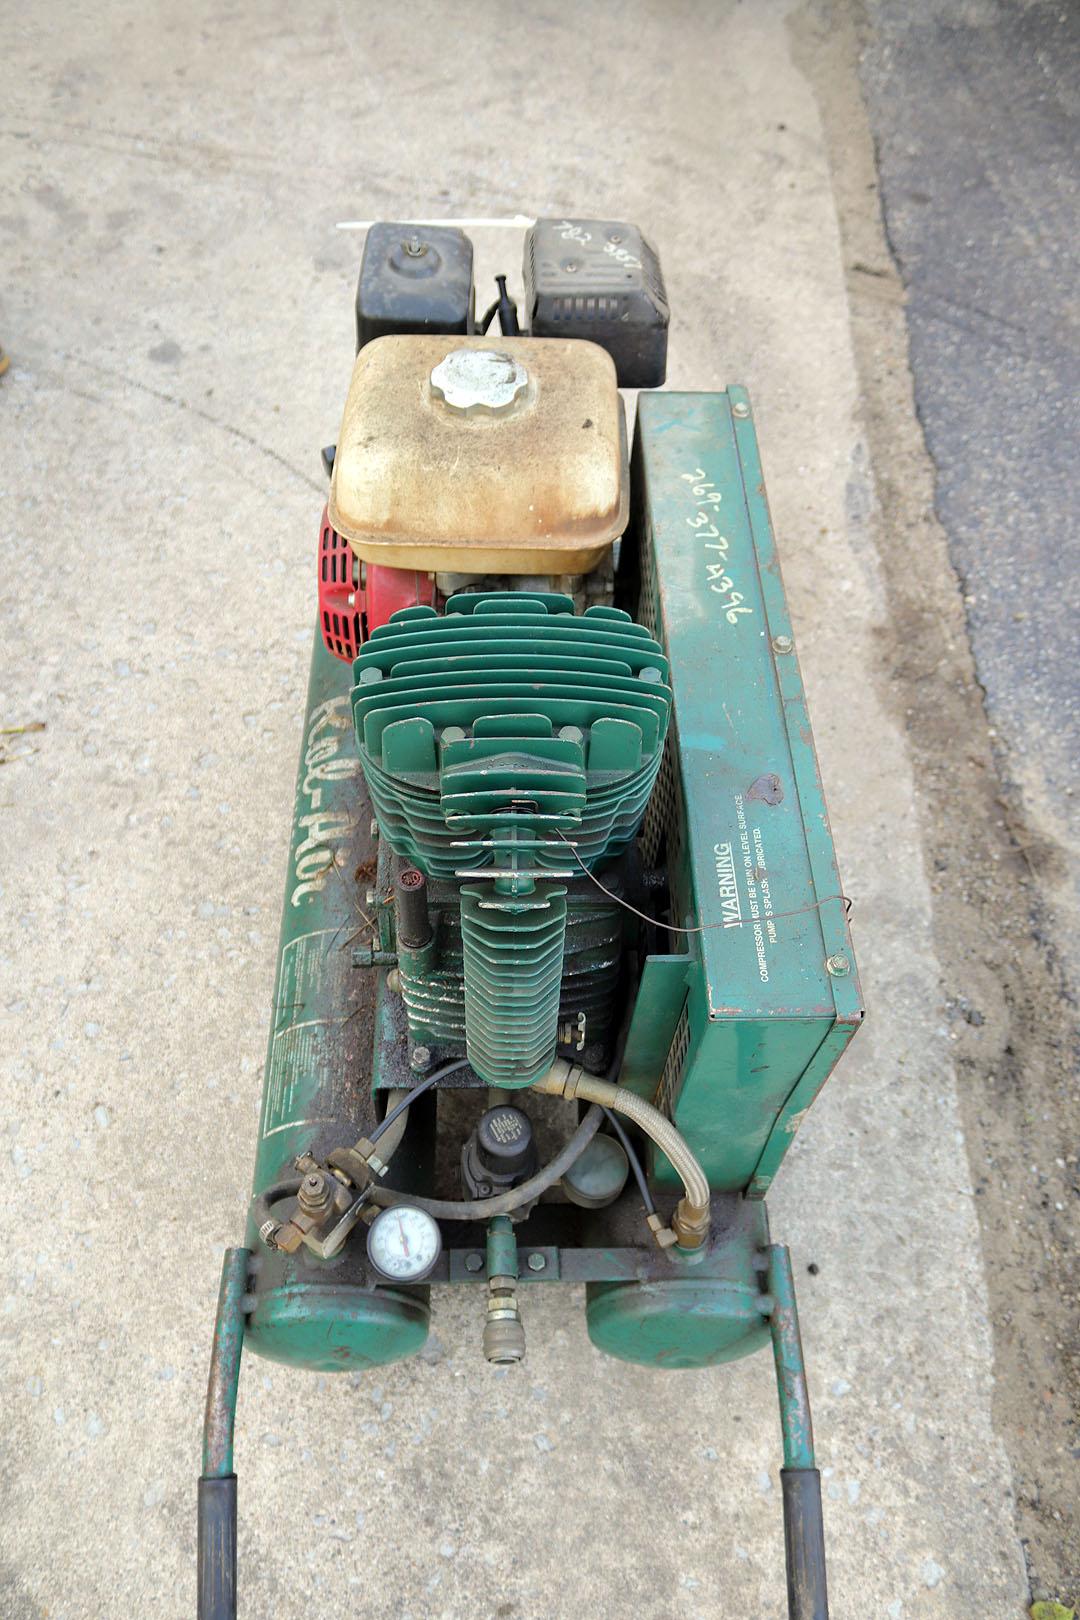 ROL-AIR SYSTEMS HONDA 6.5 HP GAS ENGINE CONSTRUCTION AIR COMPRESSOR SINGLE FRONT TIRE